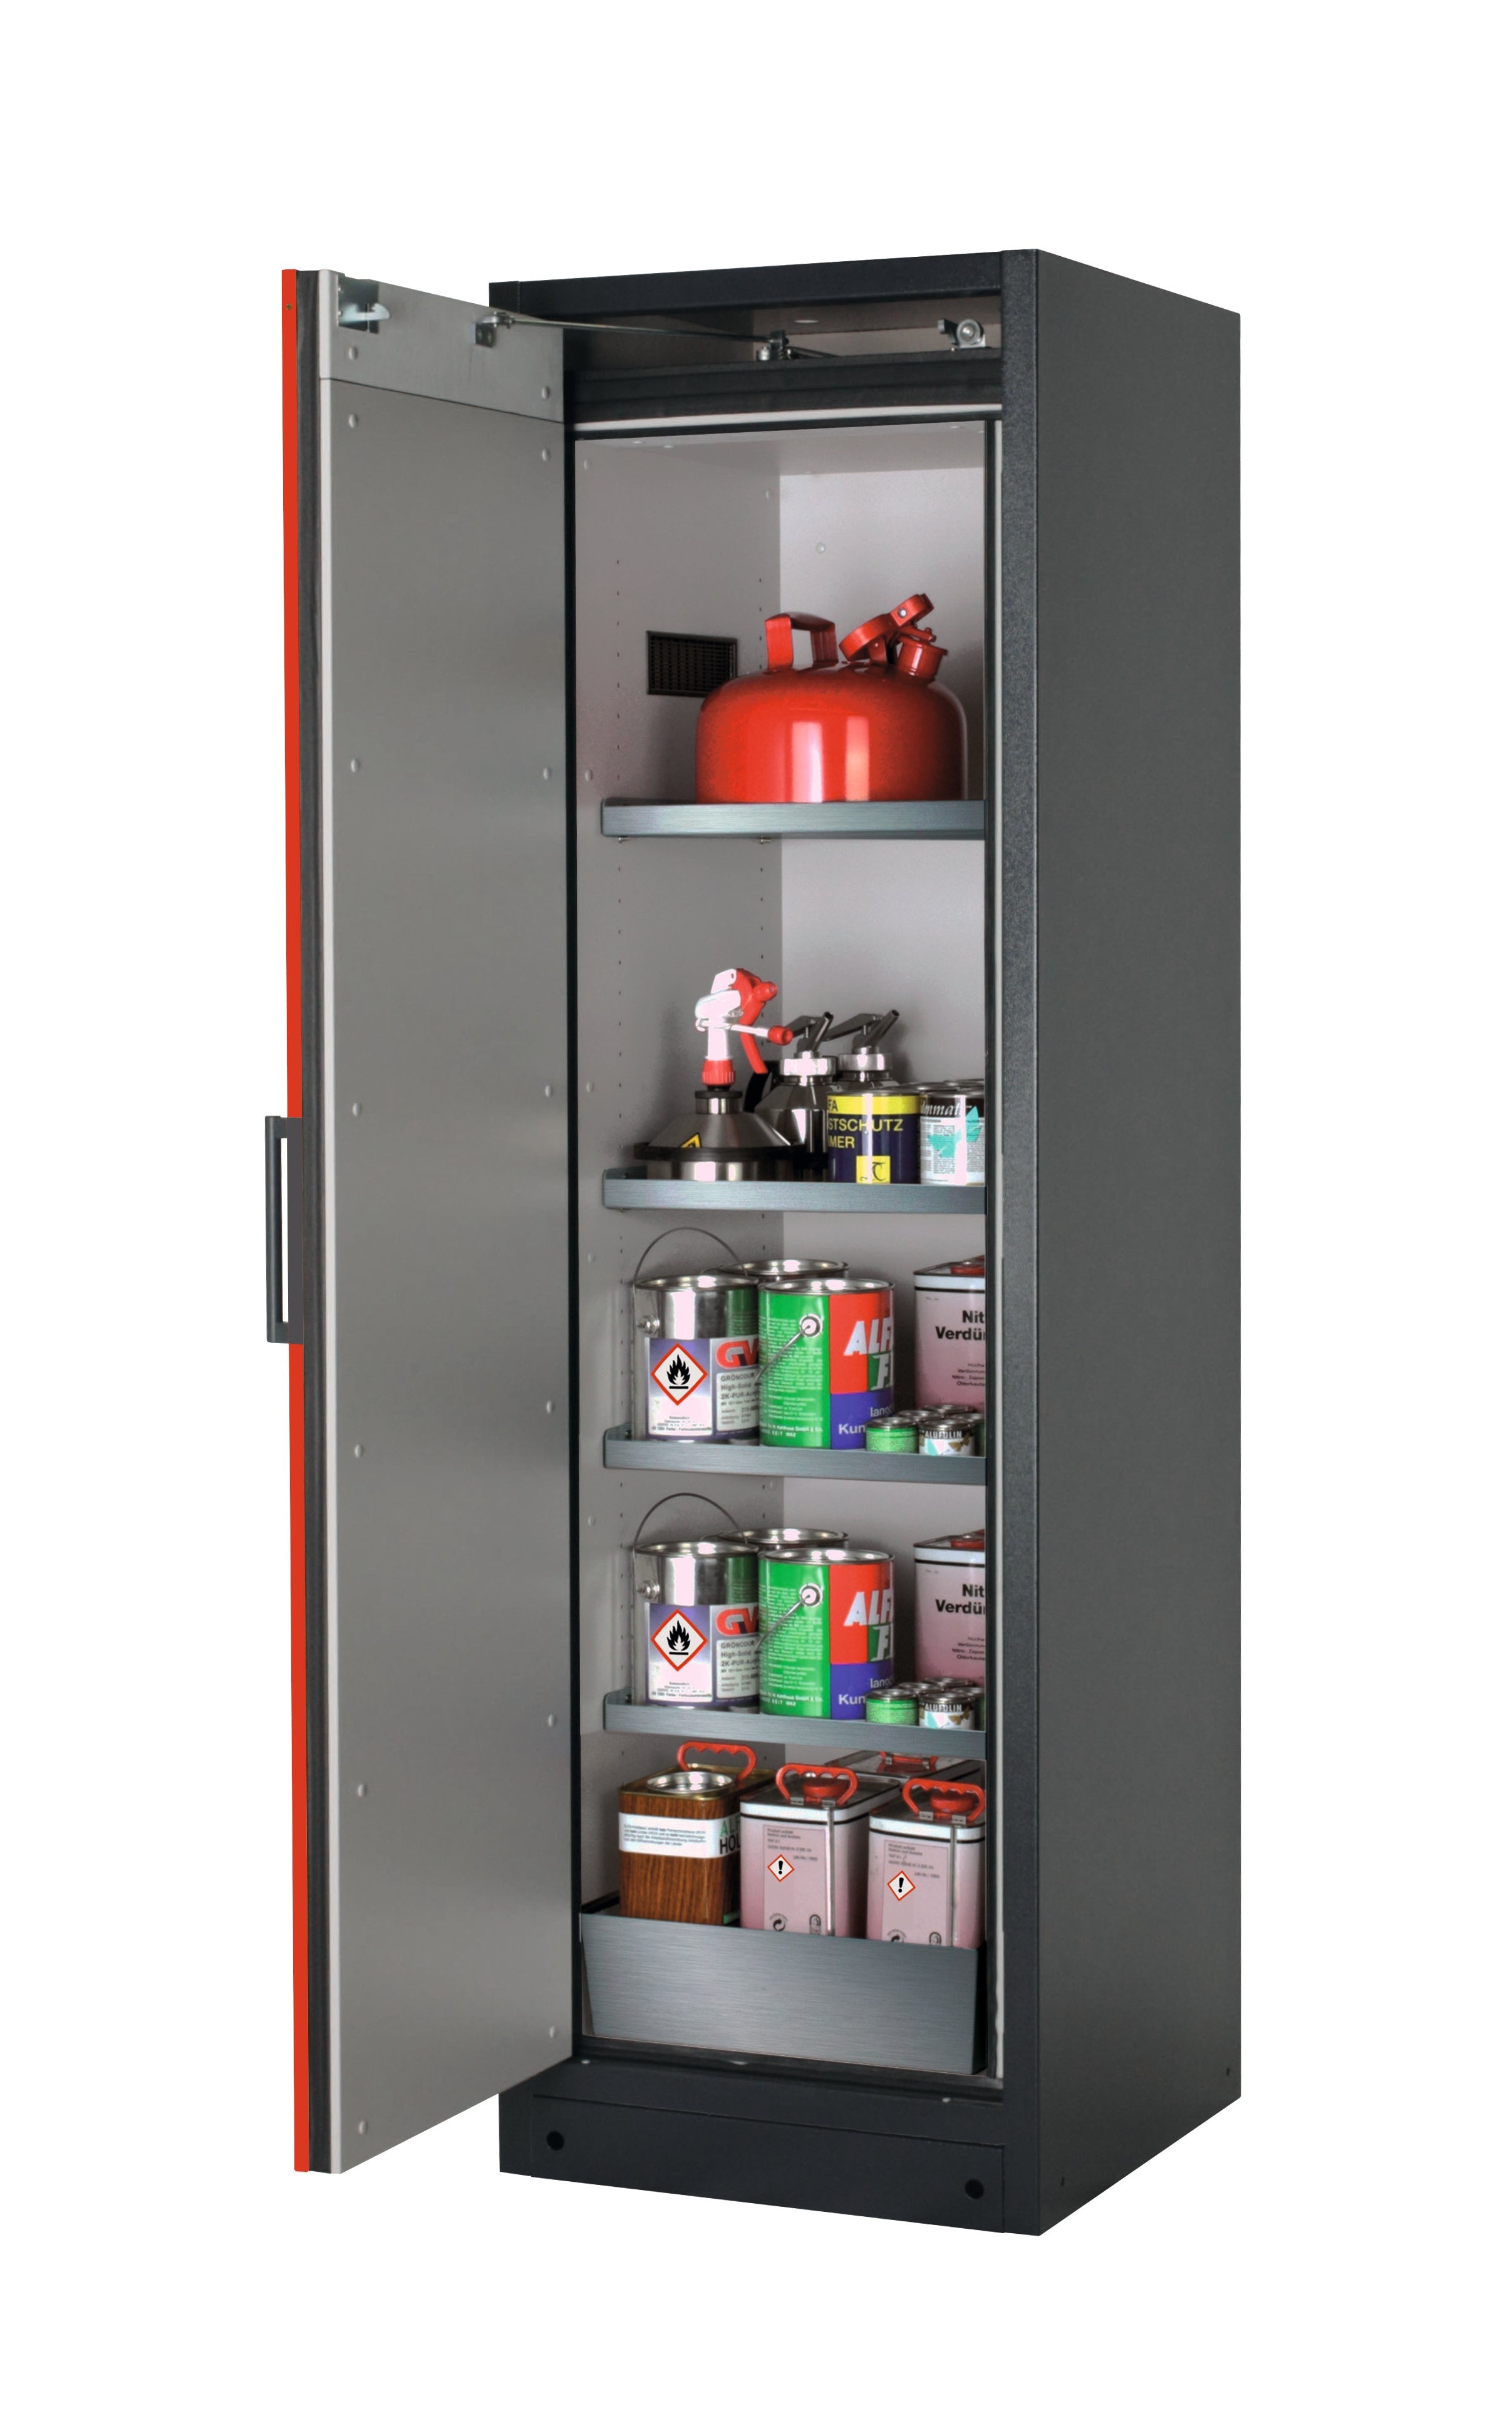 Type 90 safety storage cabinet Q-CLASSIC-90 model Q90.195.060 in traffic red RAL 3020 with 4x shelf standard (stainless steel 1.4301),